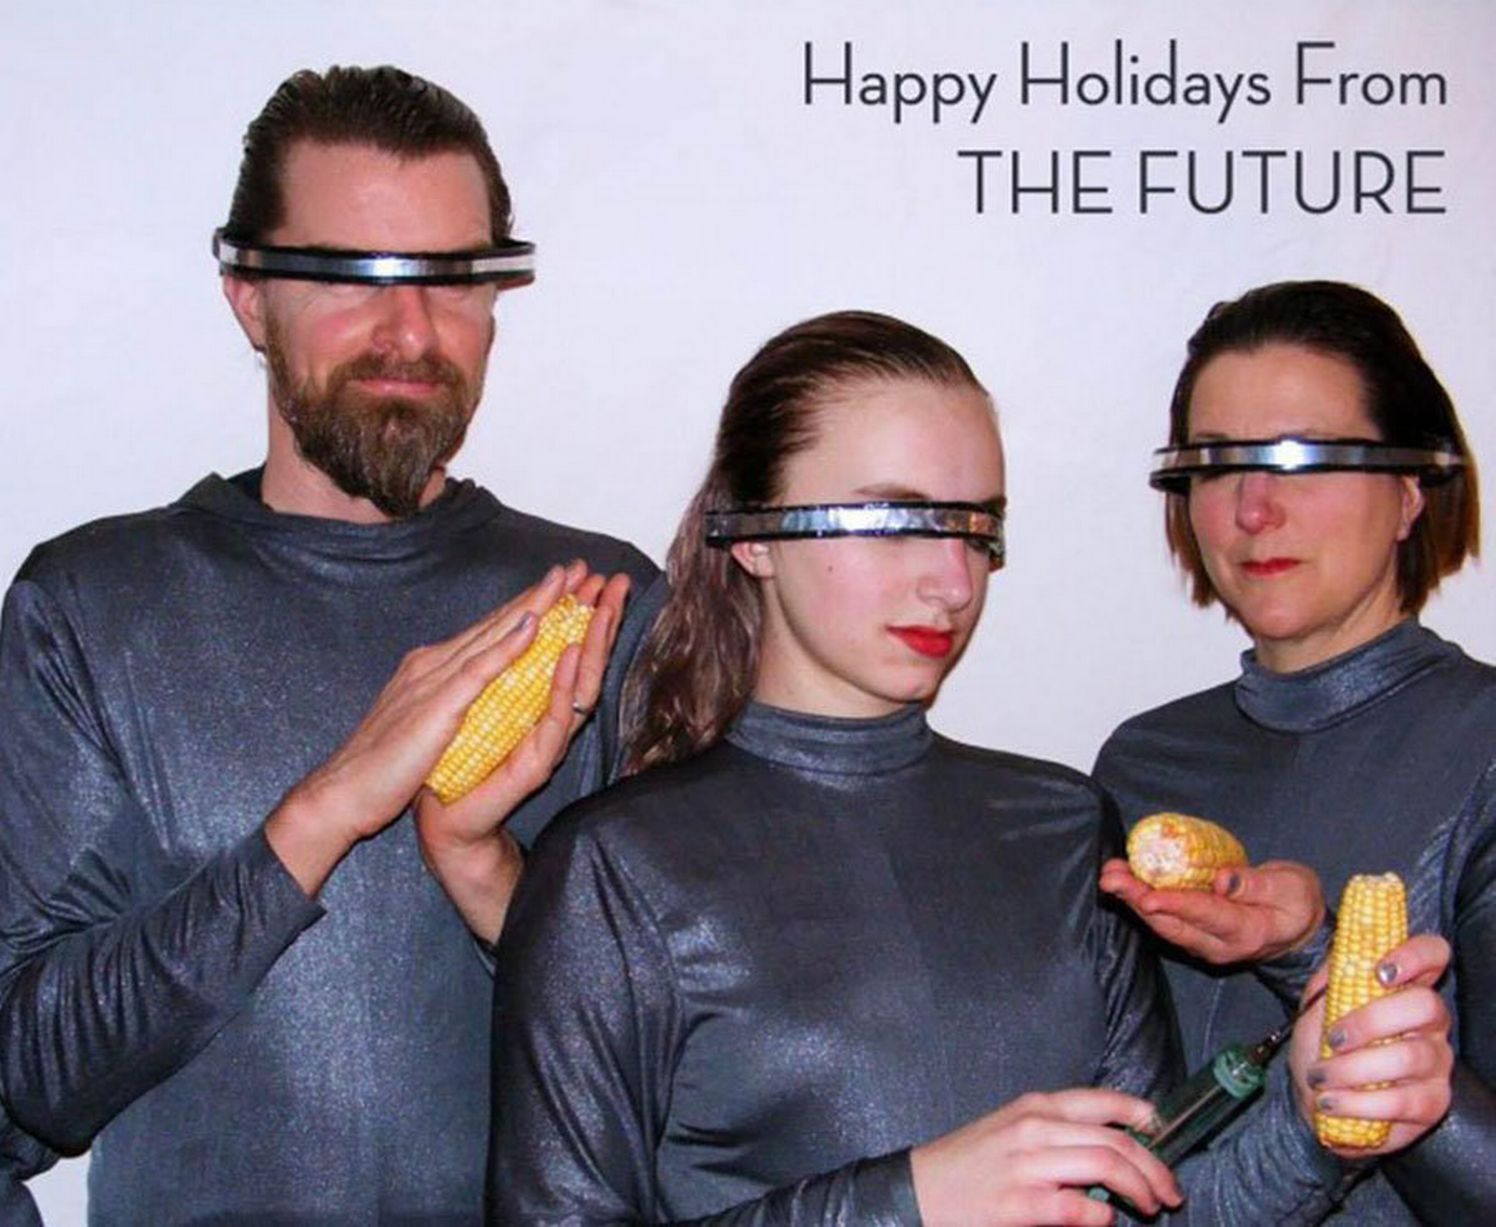 Awkward Family Christmas Cards - cyber woman with corn - Happy Holidays From The Future